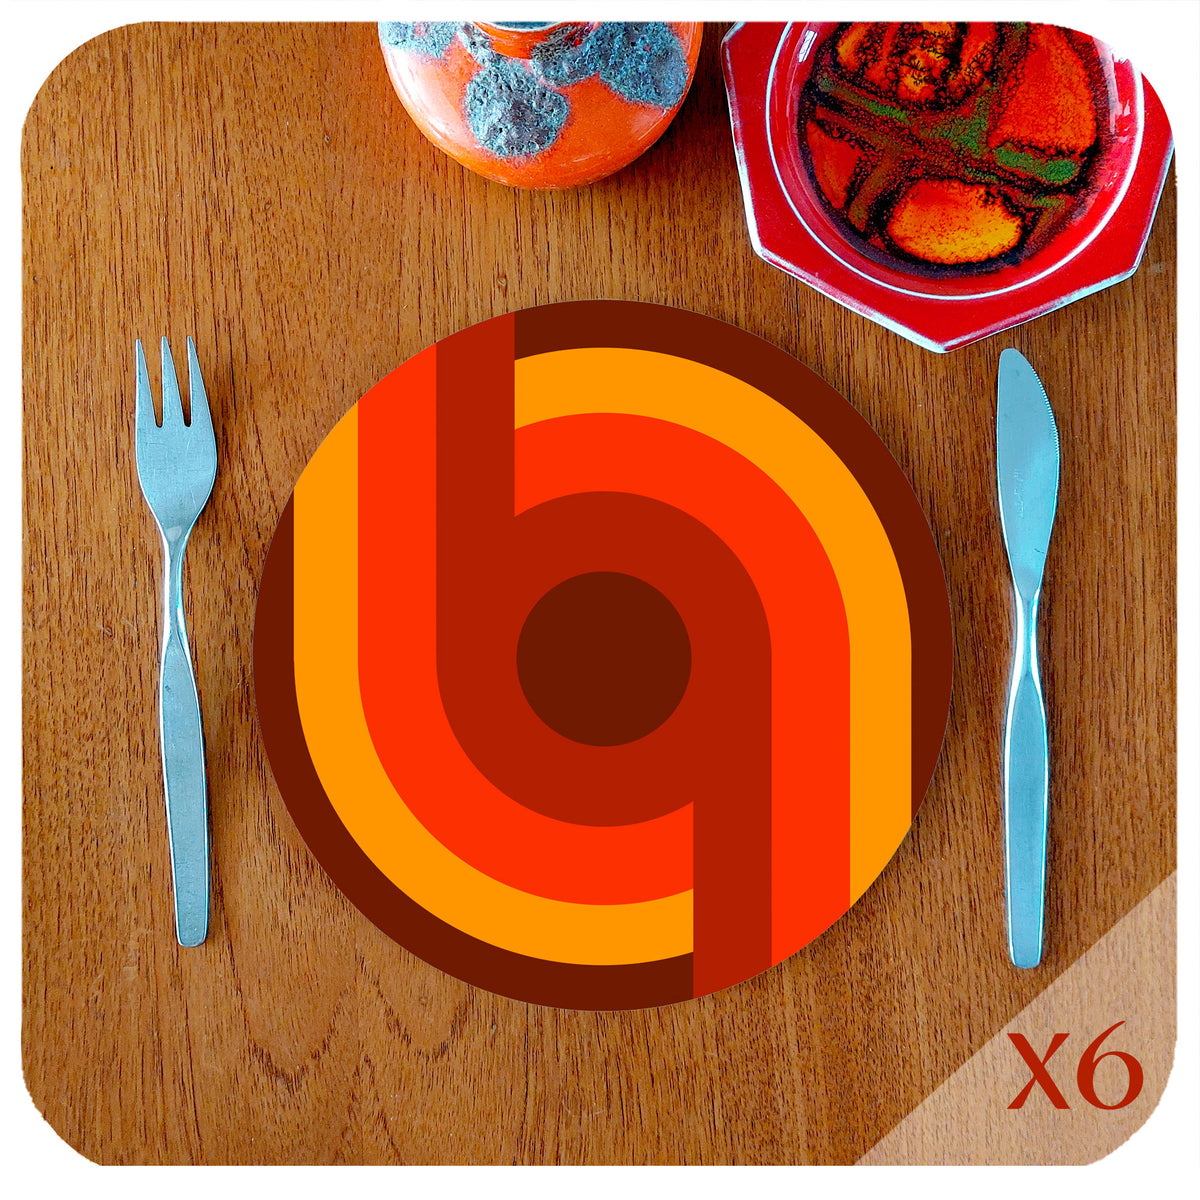 A 70s style round placemat lies on a teak table with vintage mid century knife and fork, and 2 mid century pottery pieces. text in the corner reads "X6" | The Inkabilly Emporium